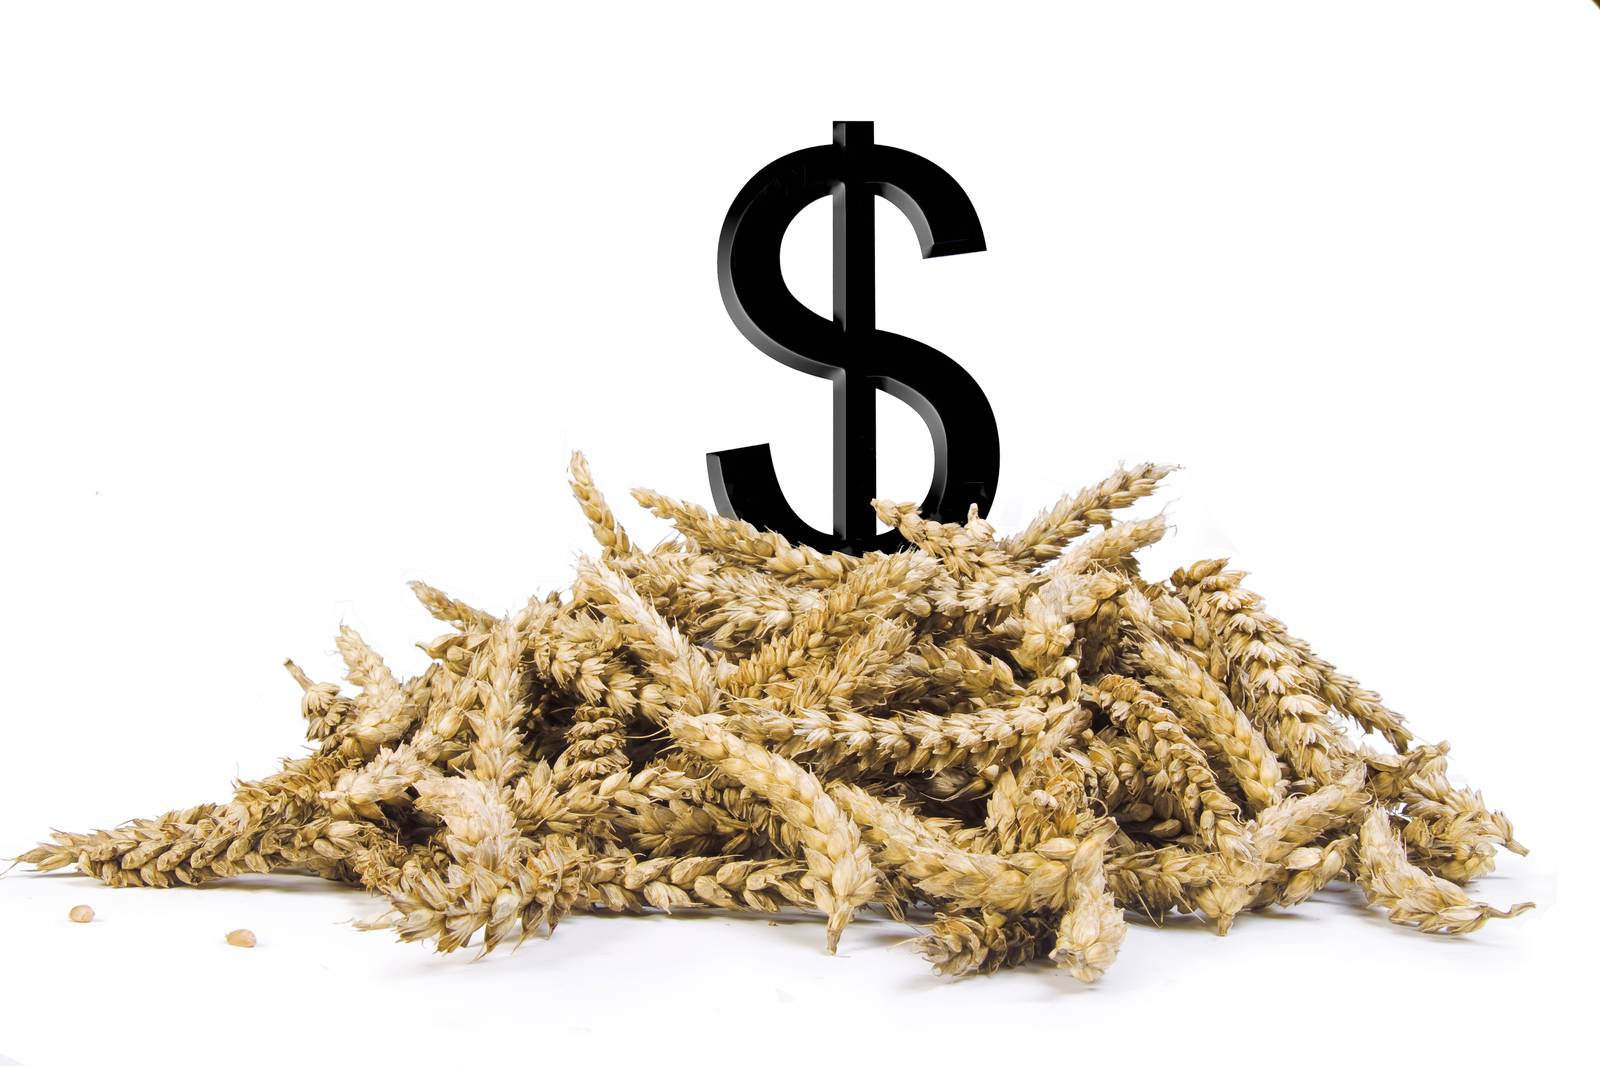 Mycotoxins: What does it really cost?